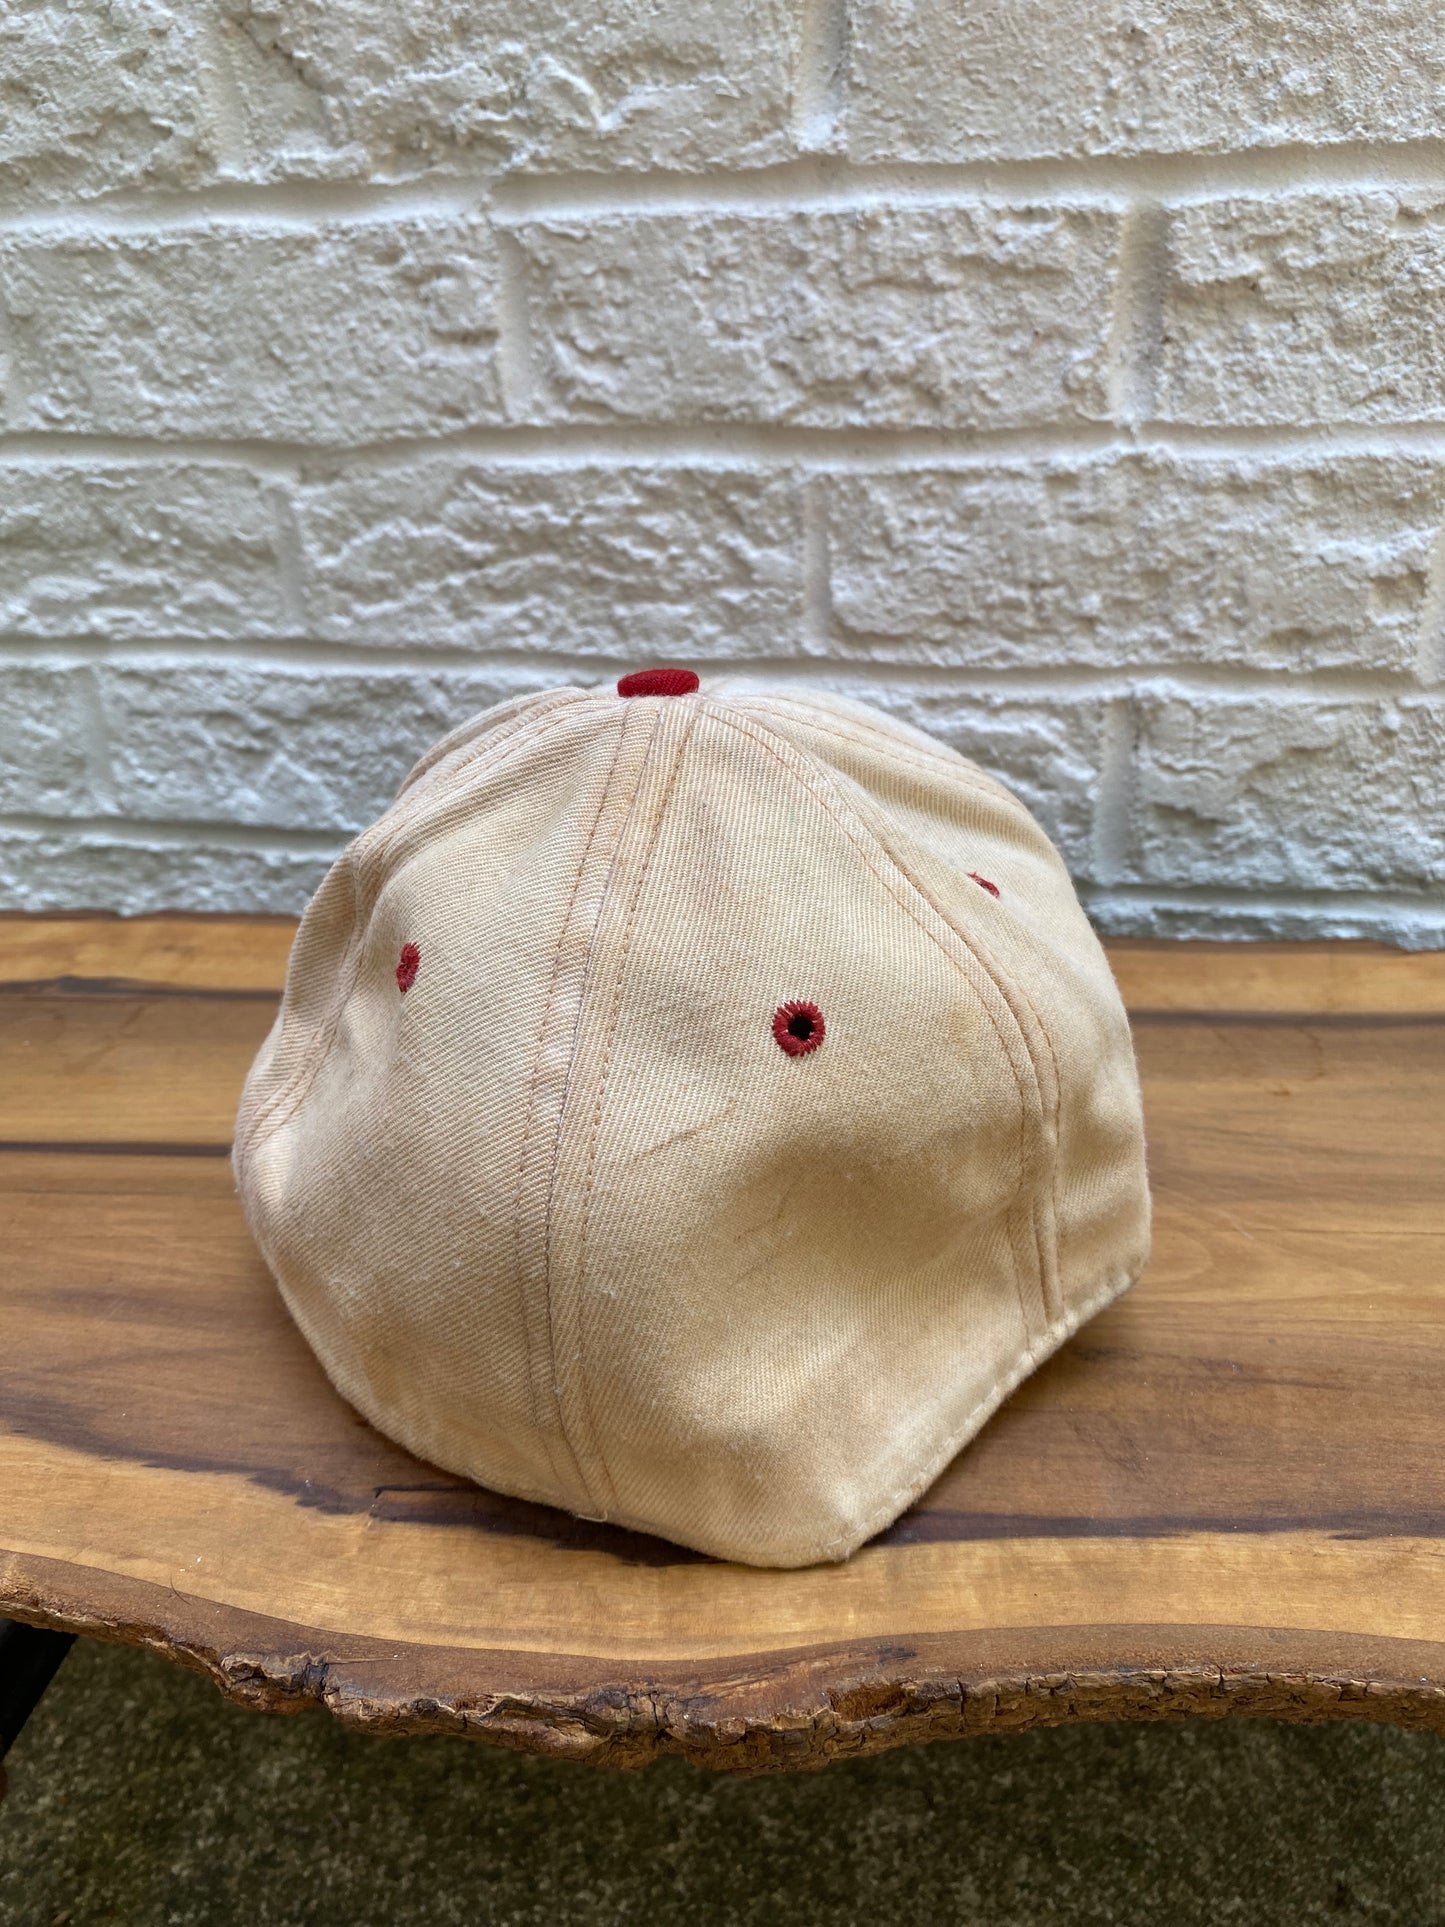 Vintage 90s Fitted Baseball Hat